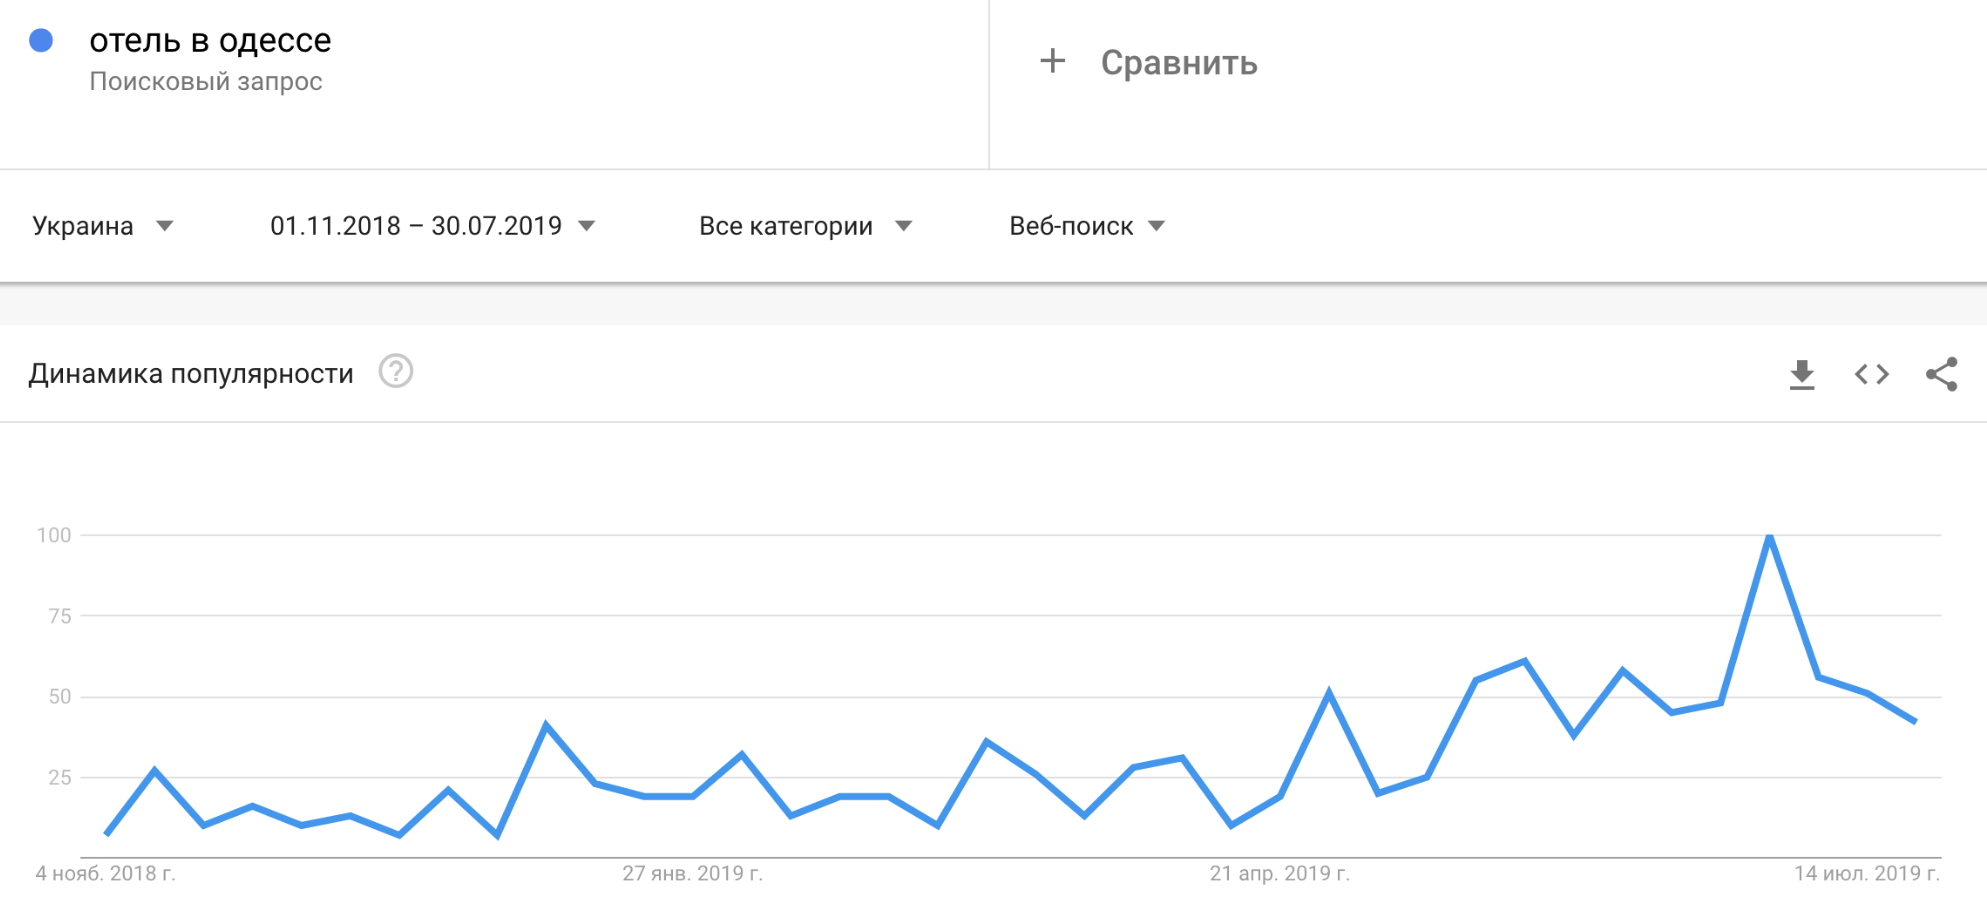 popularity dynamics of the request hotel in odesa